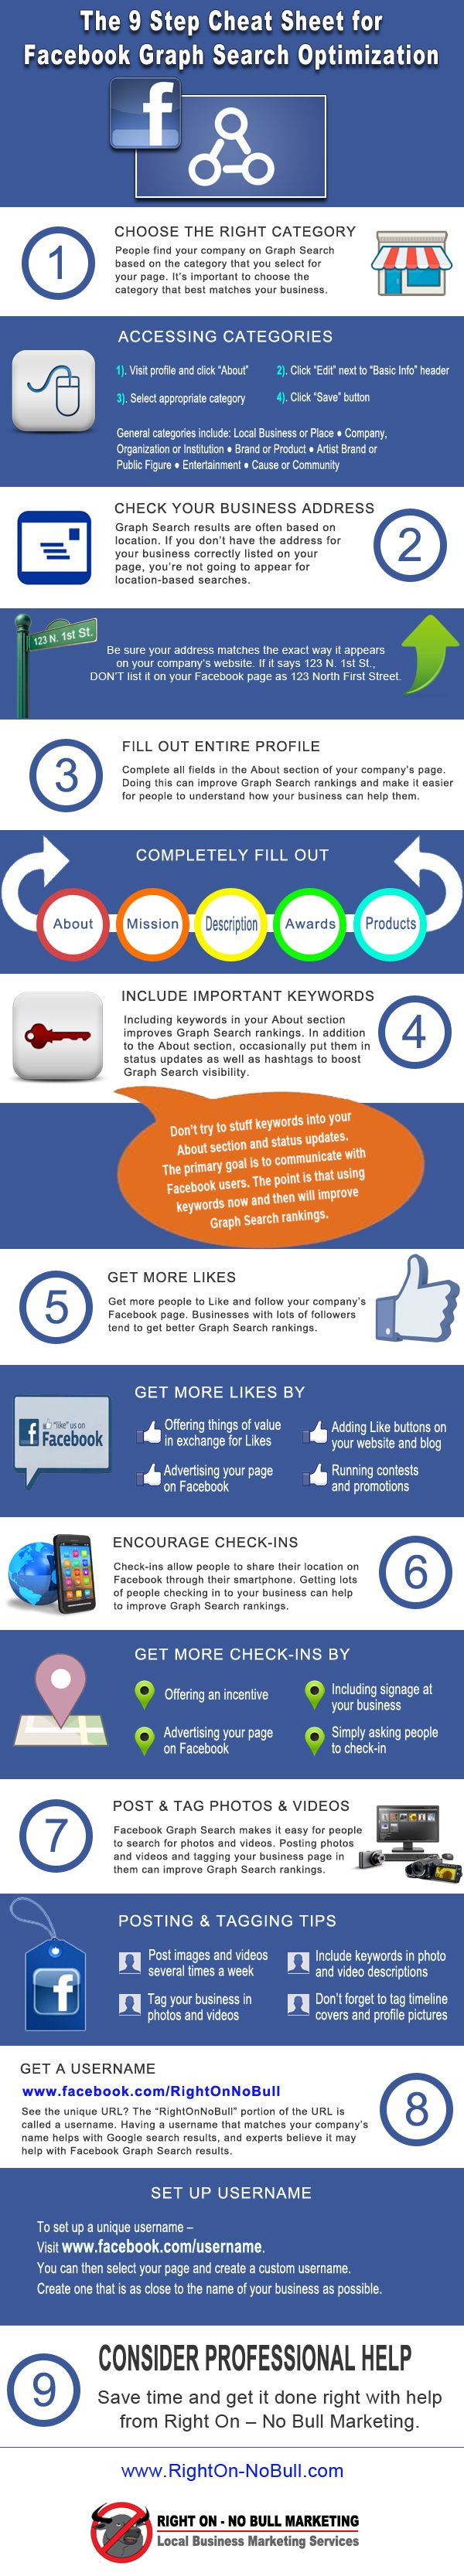 The 9 step cheat sheet for Facebook Graph Search Optimization